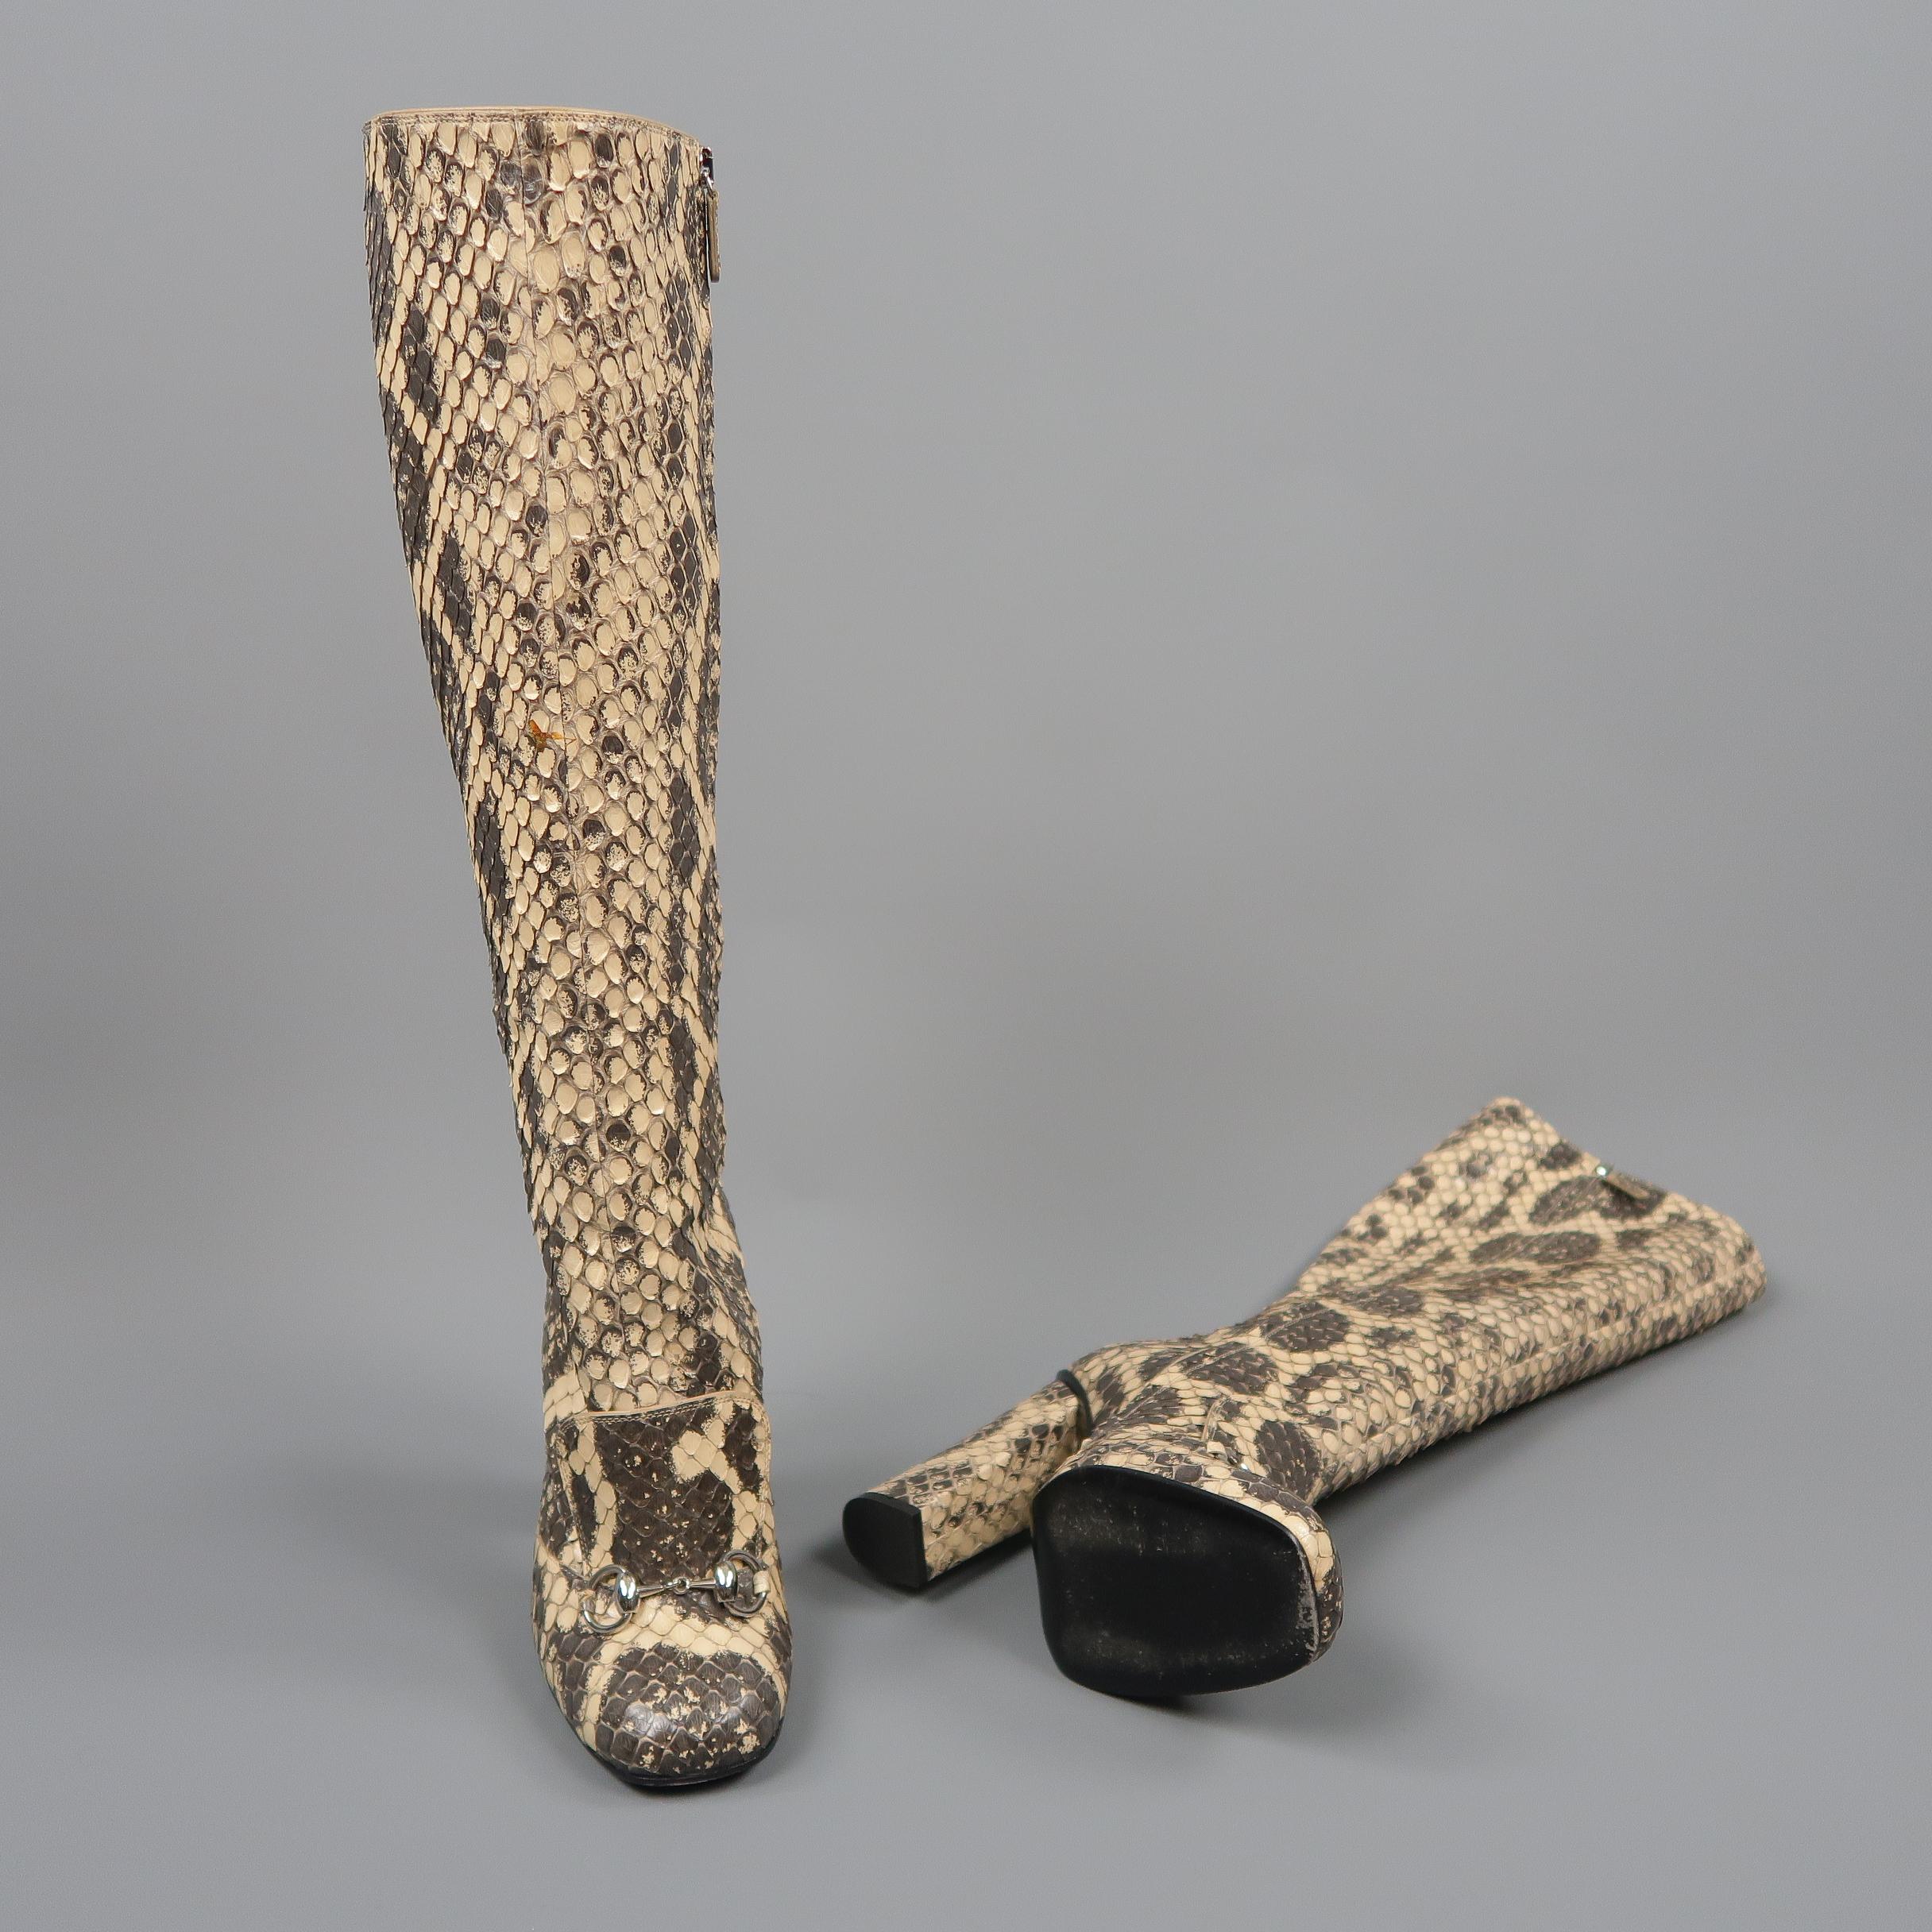 GUCCI Size 7.5 Beige Phython Snakeskin Leather Horsebit Knee High Boots 2